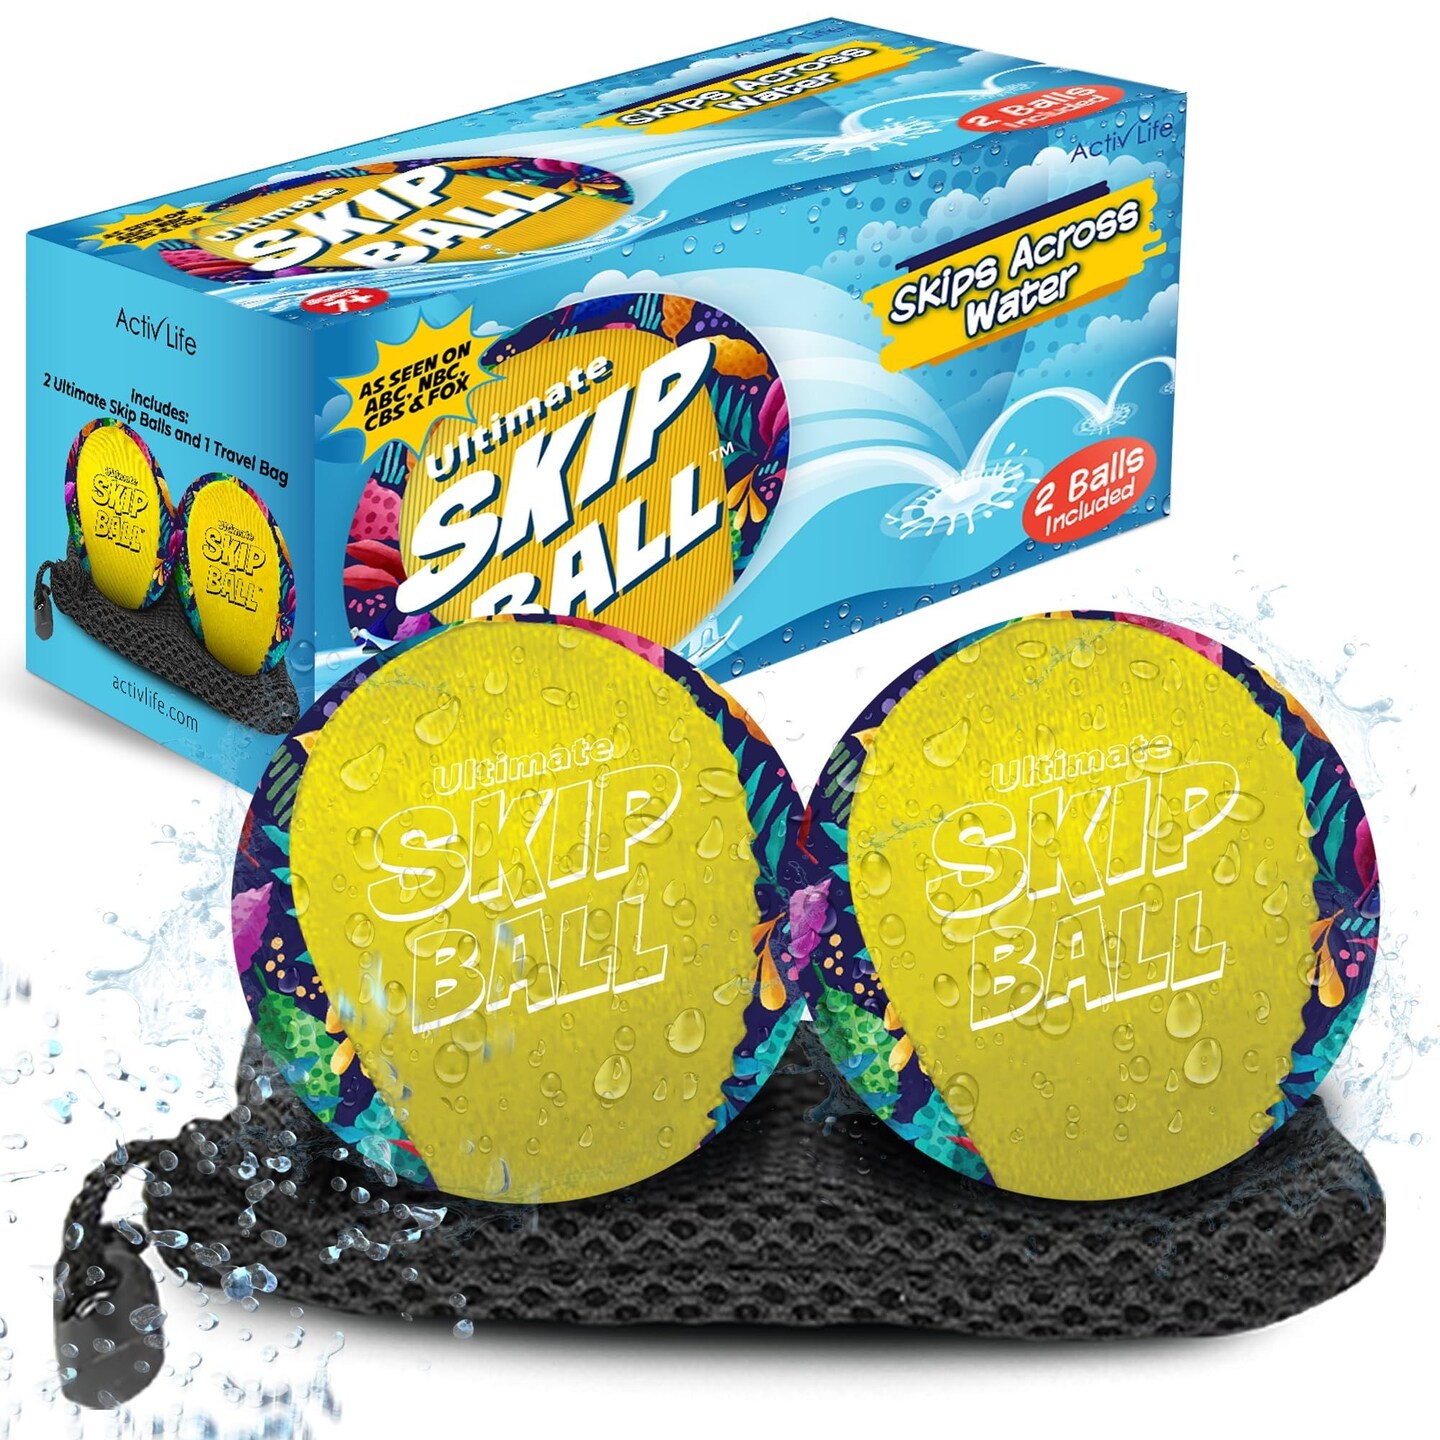 Easter Gifts for Kids [Water Skip Balls] Beach Games for Adults and Family Basket Stuffers Boys Girls Ages 7 8-10 11 12 Year Old Teen Gifts Swimming Pool Swim Toys Fun Sand Mom Dad Birthday Presents